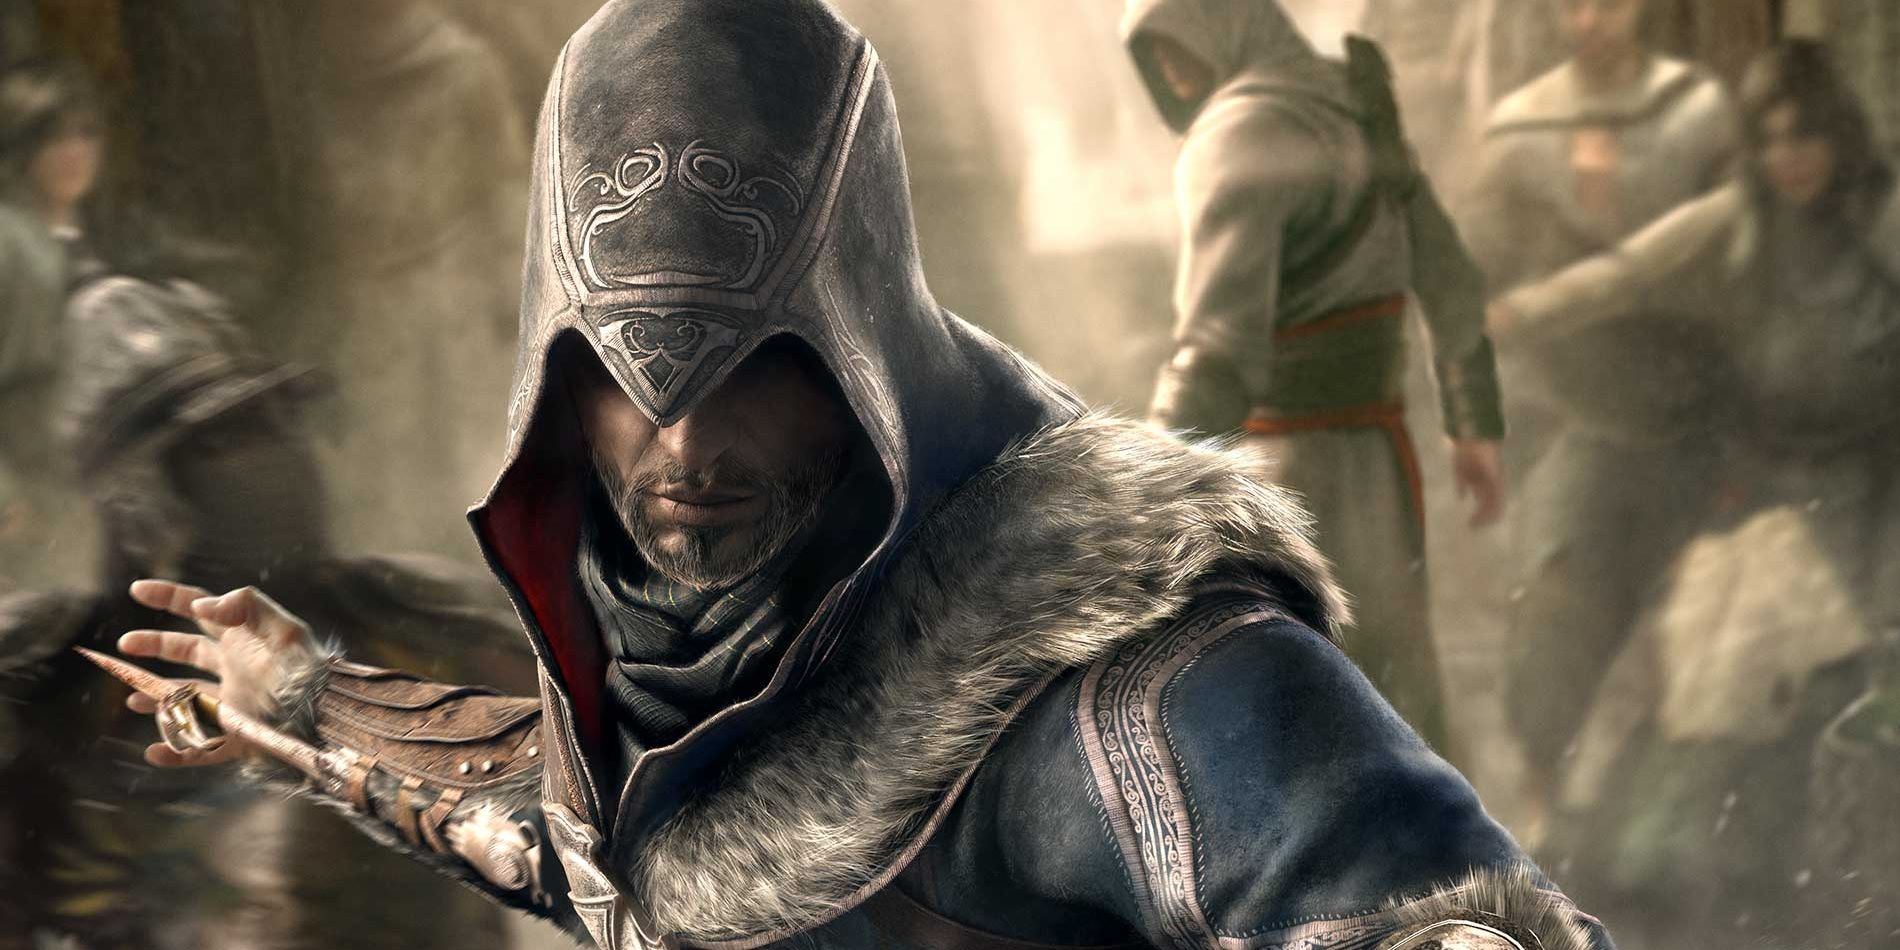 weird assassins creed lore most players dont know